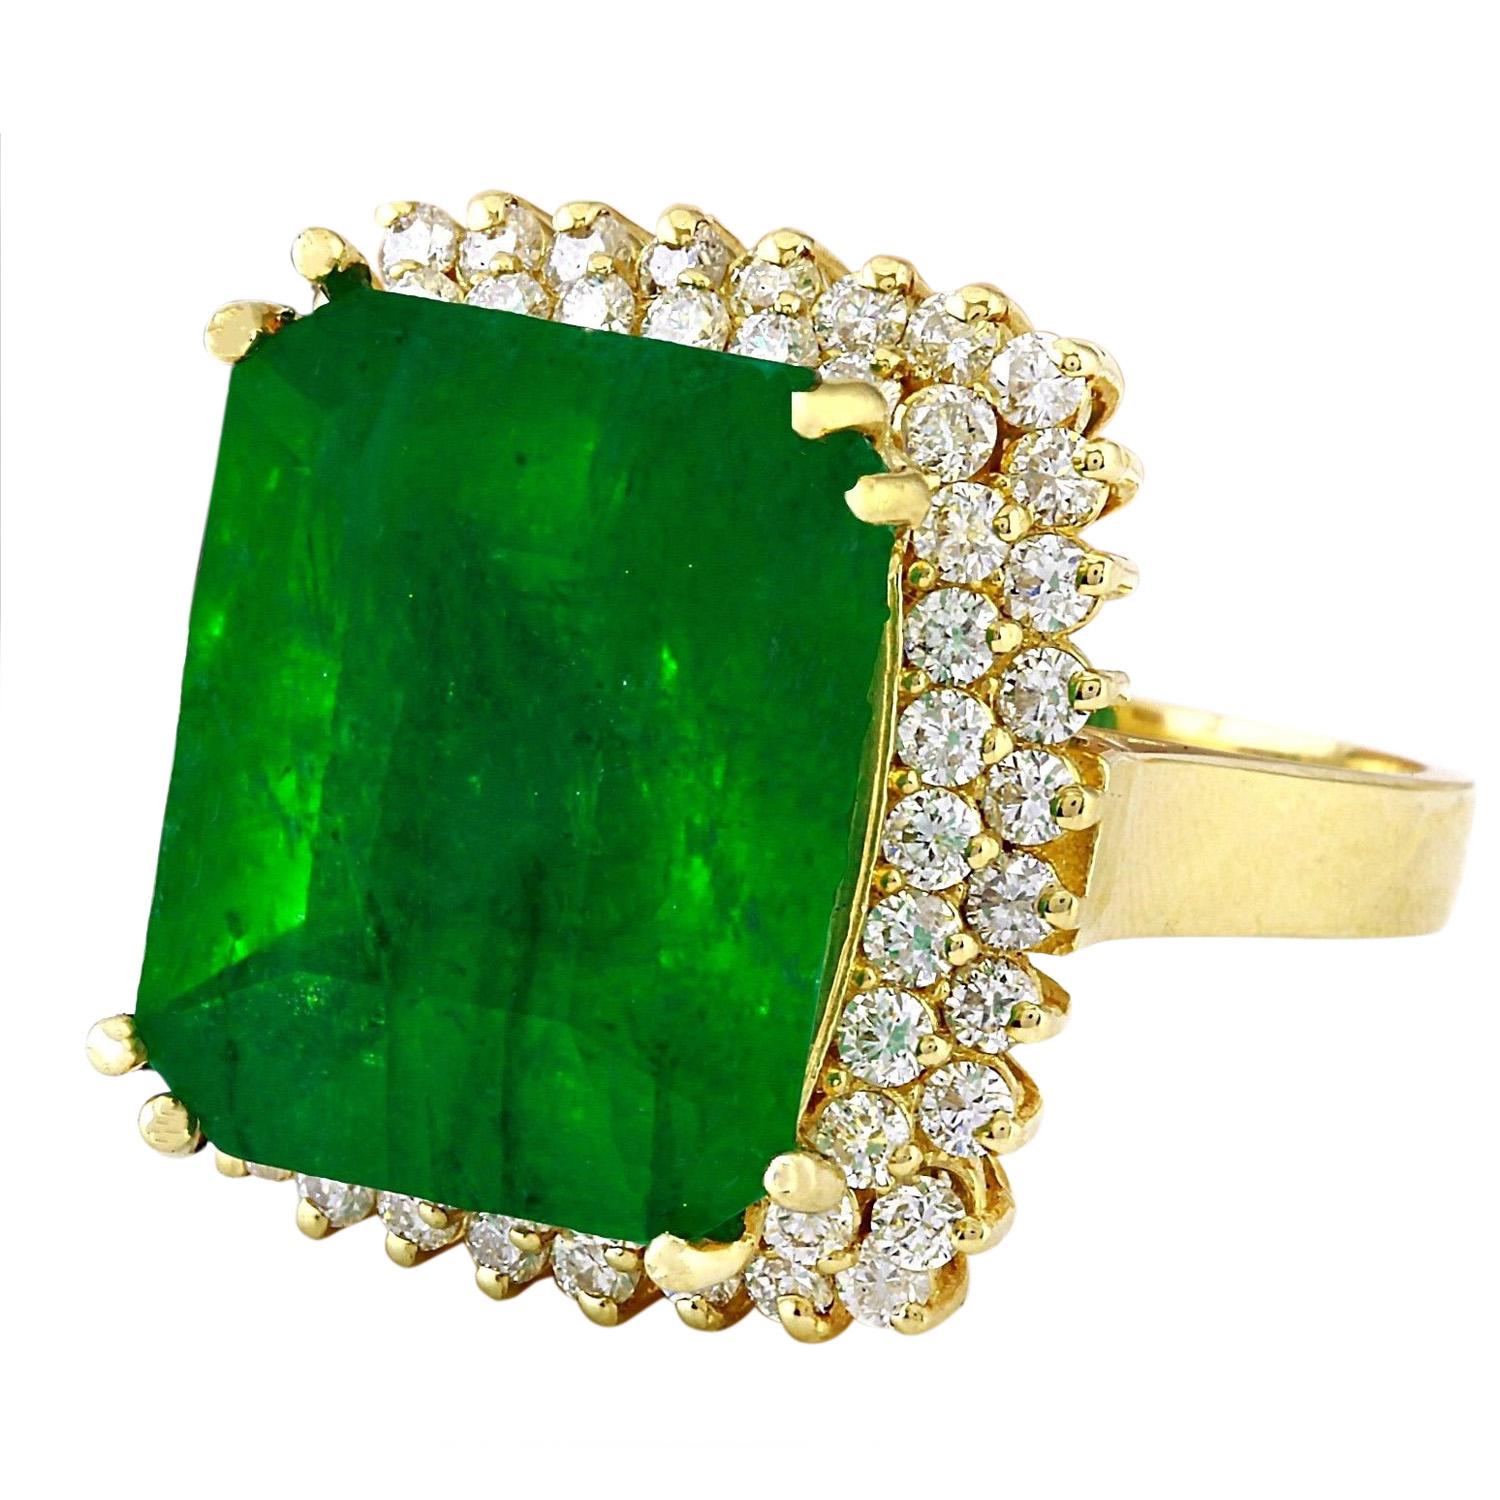 16.13 Carat Natural Emerald 14K Solid Yellow Gold Diamond Ring
 Item Type: Ring
 Item Style: Cocktail
 Material: 14K Yellow Gold
 Mainstone: Emerald
 Stone Color: Green
 Stone Weight: 14.13 Carat
 Stone Shape: Emerald
 Stone Quantity: 1
 Stone